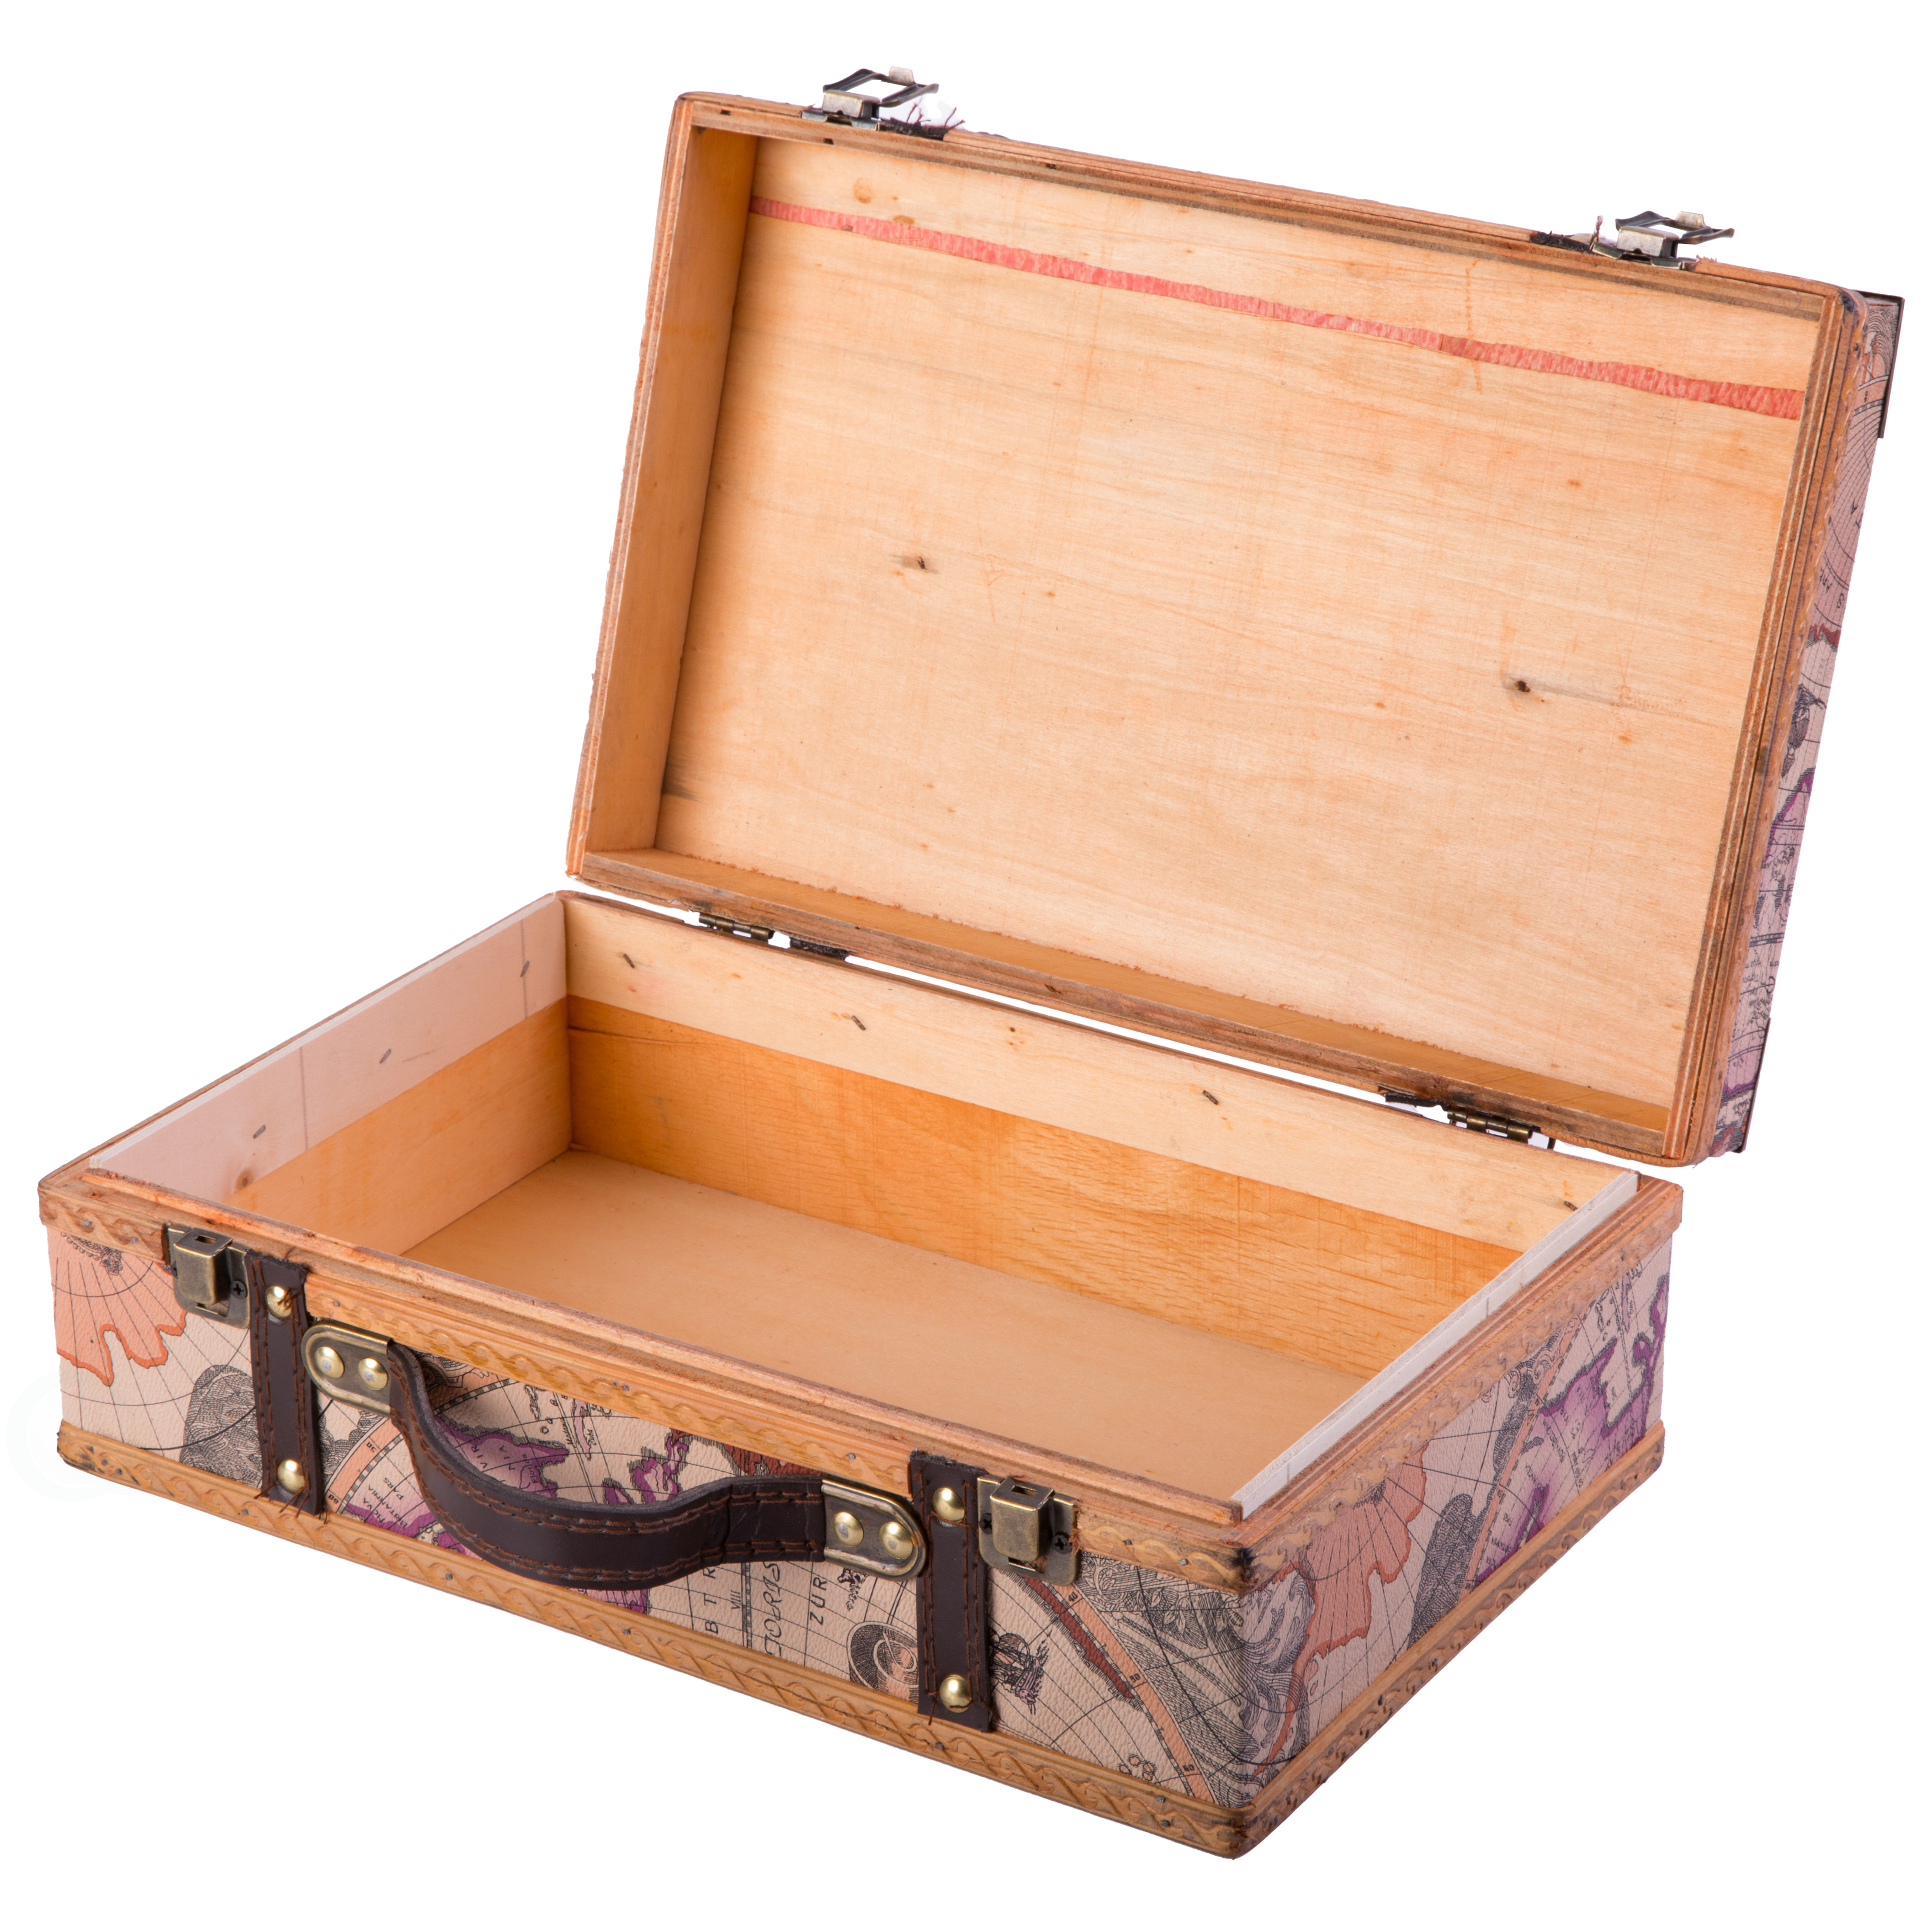 Old World Map Suitcase